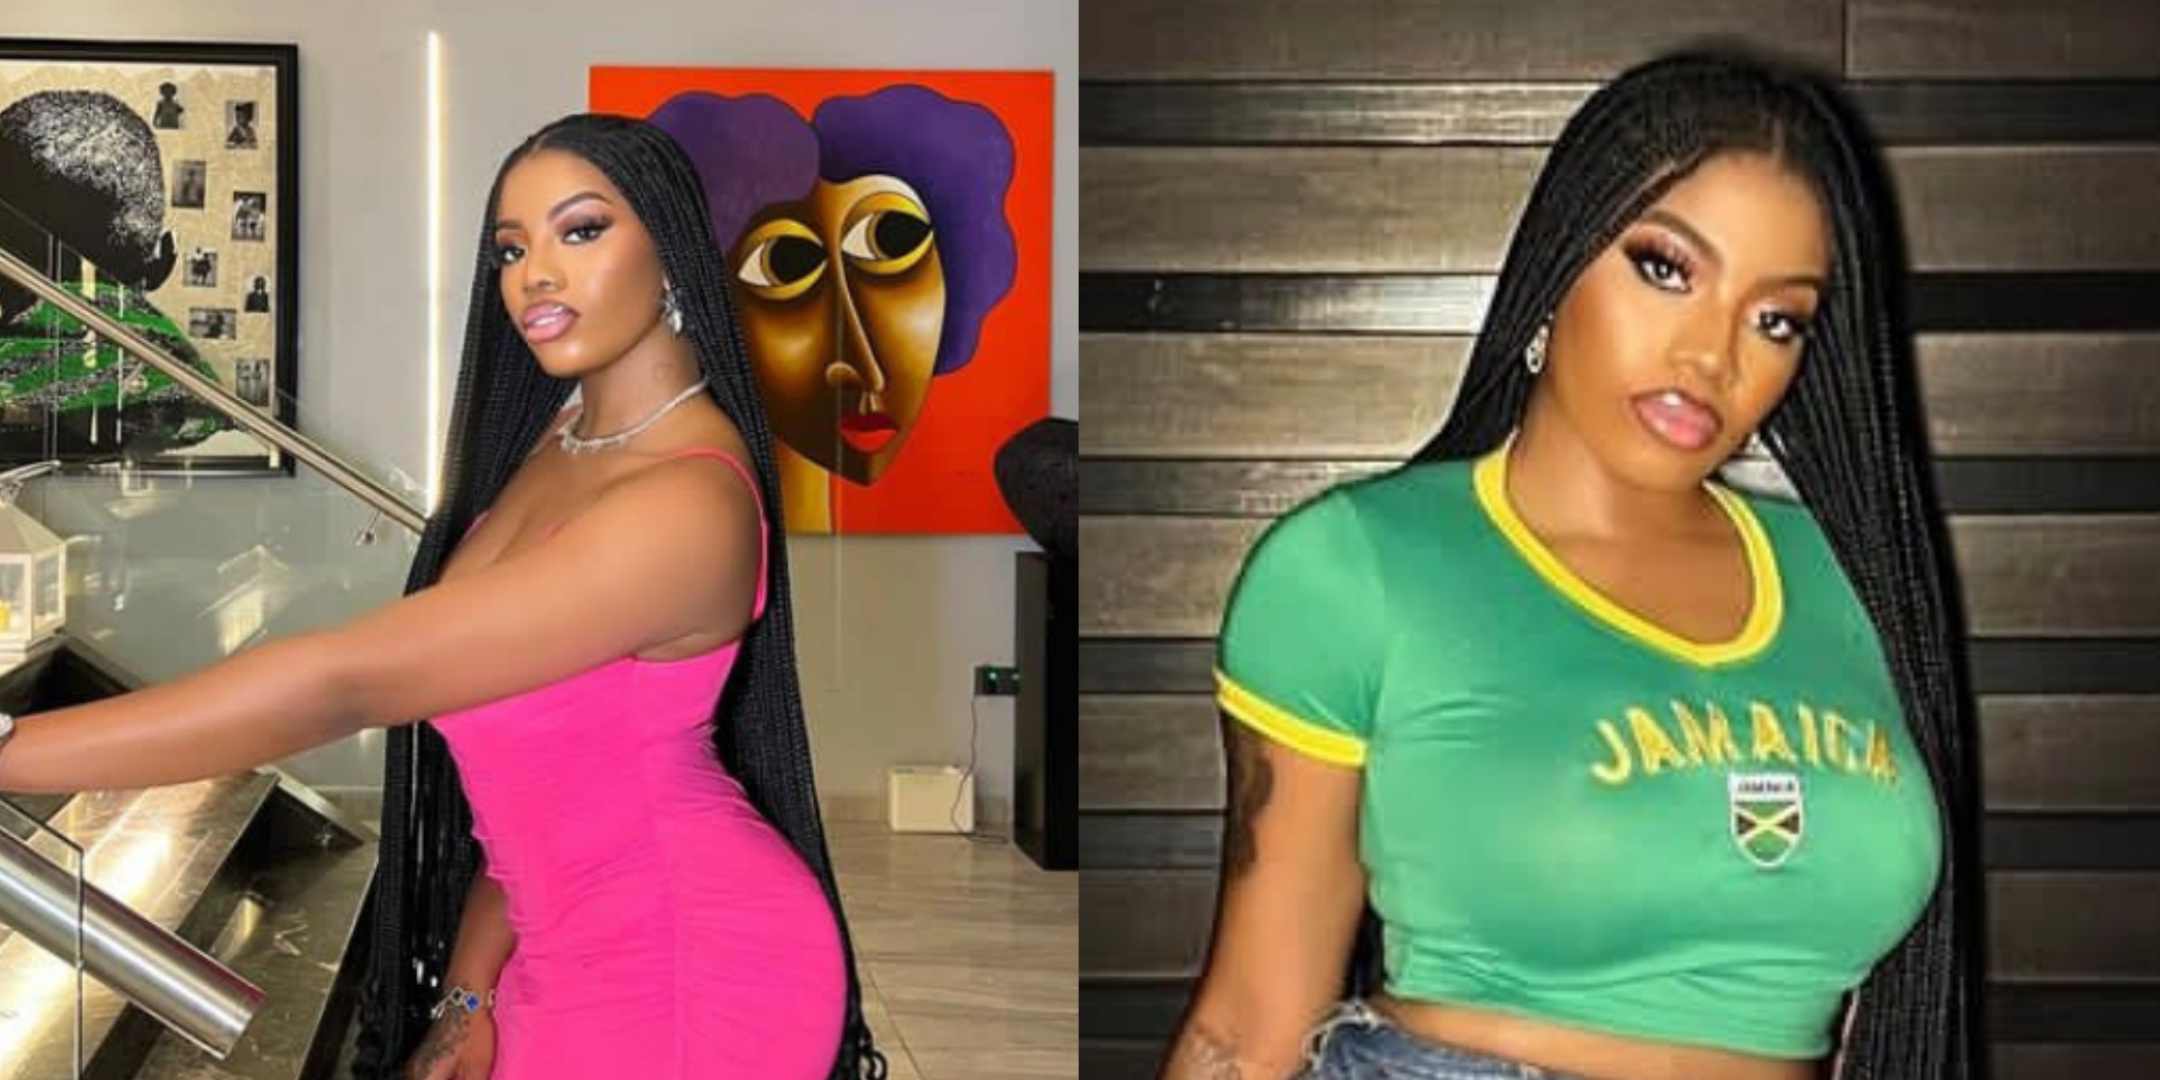 "Broke girls go think say na hate speech" – Reactions as Angel explains why it's better to cry in a Keke Napep than a Bentley